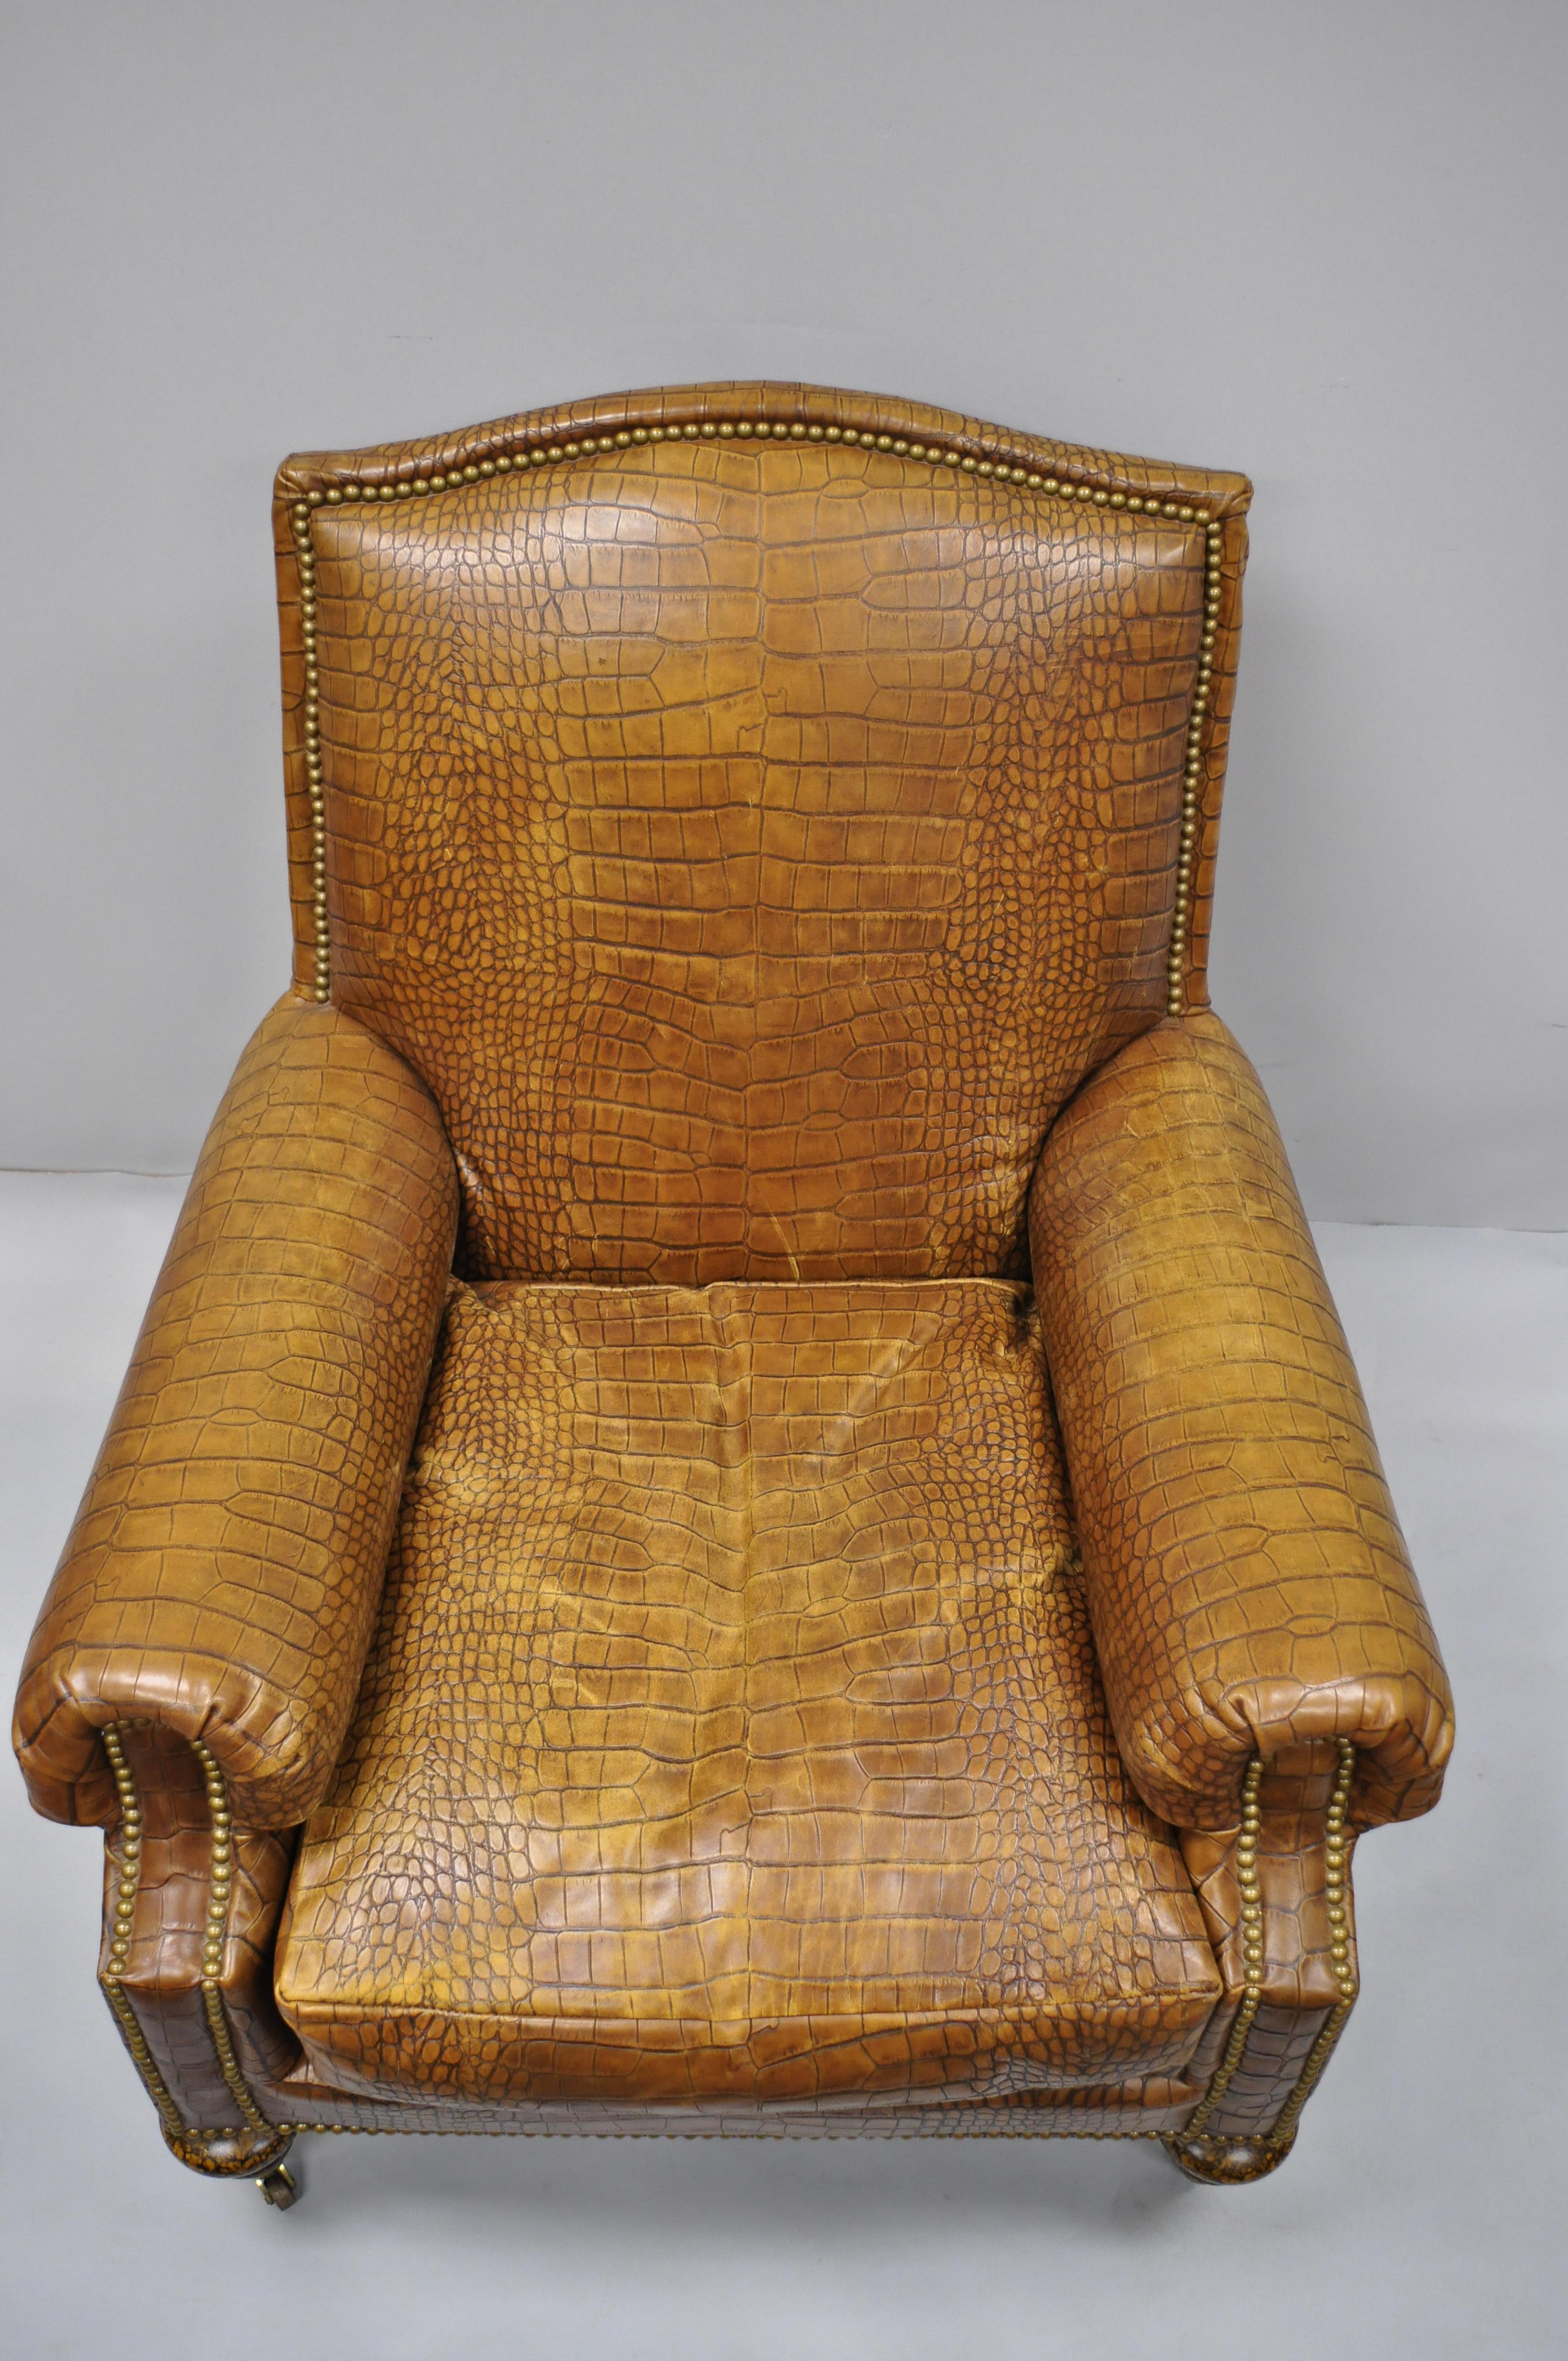 Contemporary English Regency Brown Leather Gator Embossed Lounge Chair & Ottoman by Pearson